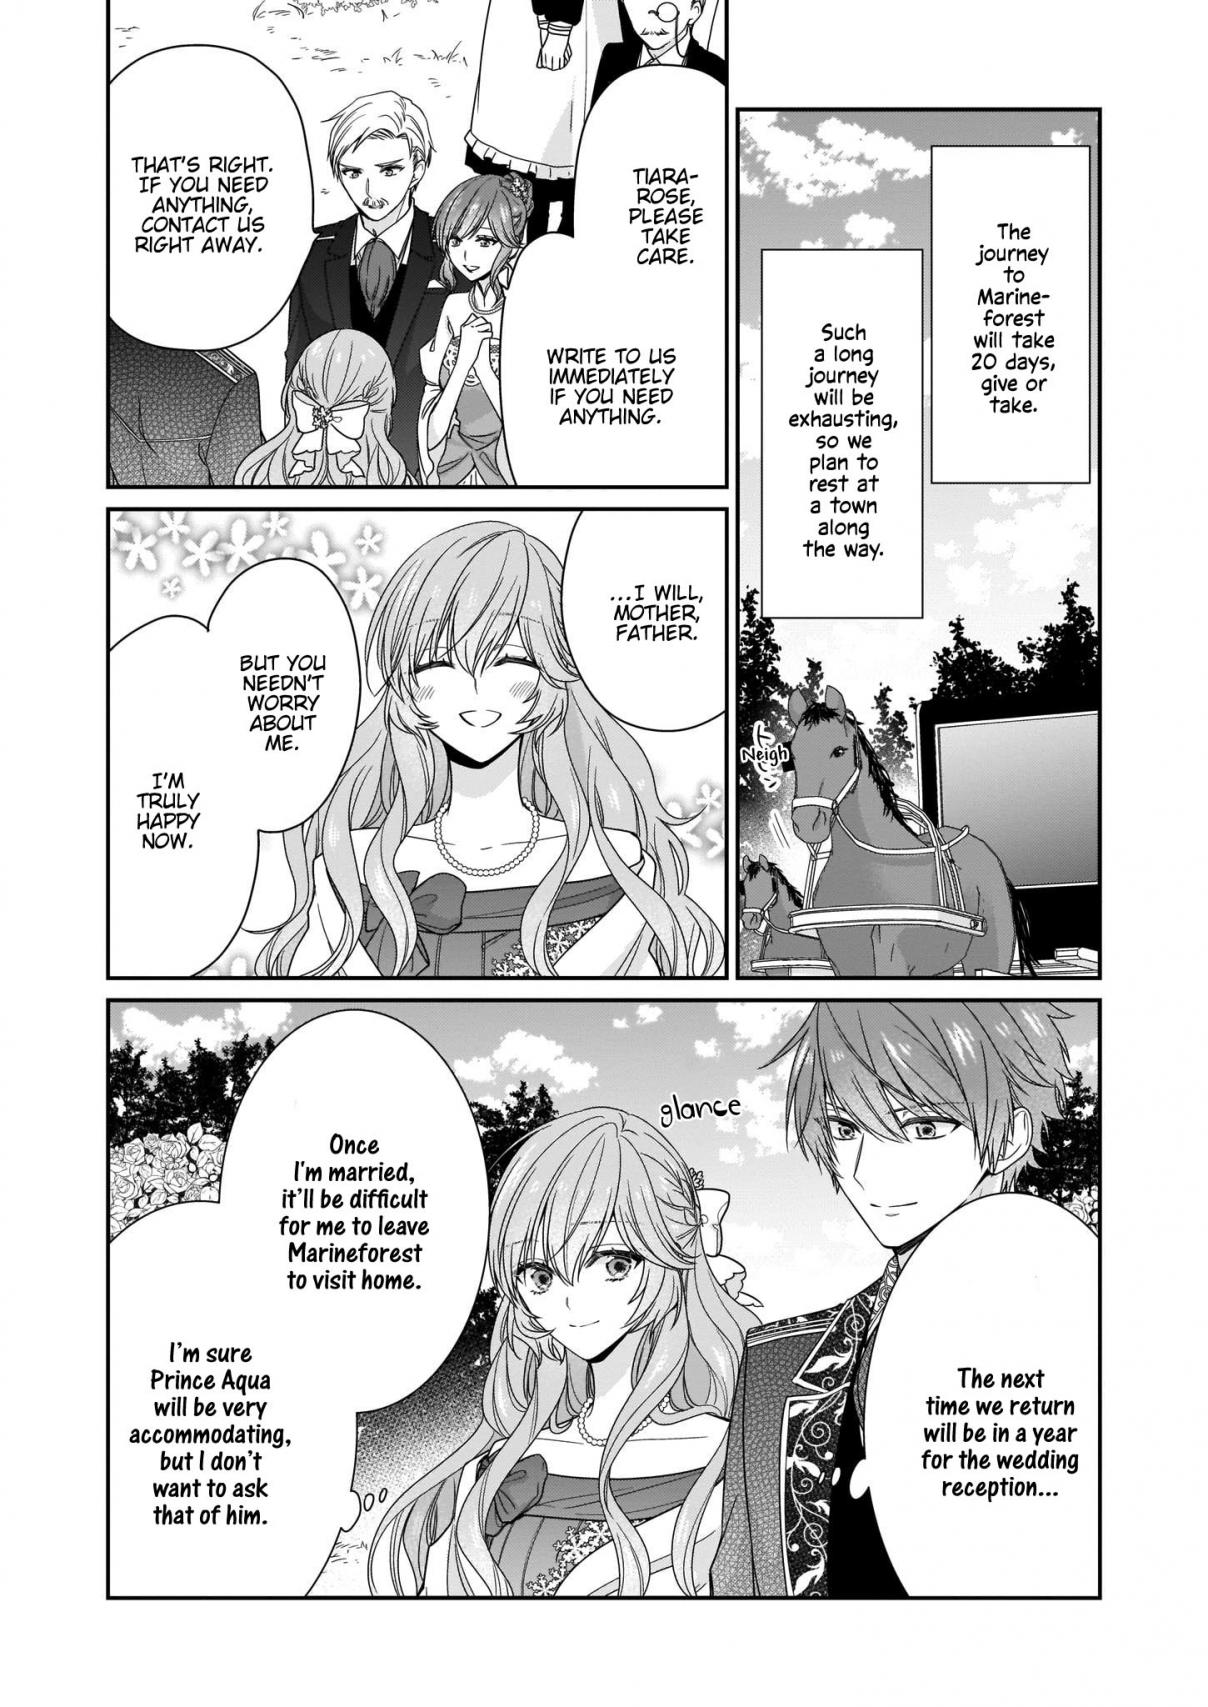 The Villainess Is Adored by the Crown Prince of the Neighboring Kingdom Vol. 3 Ch. 12